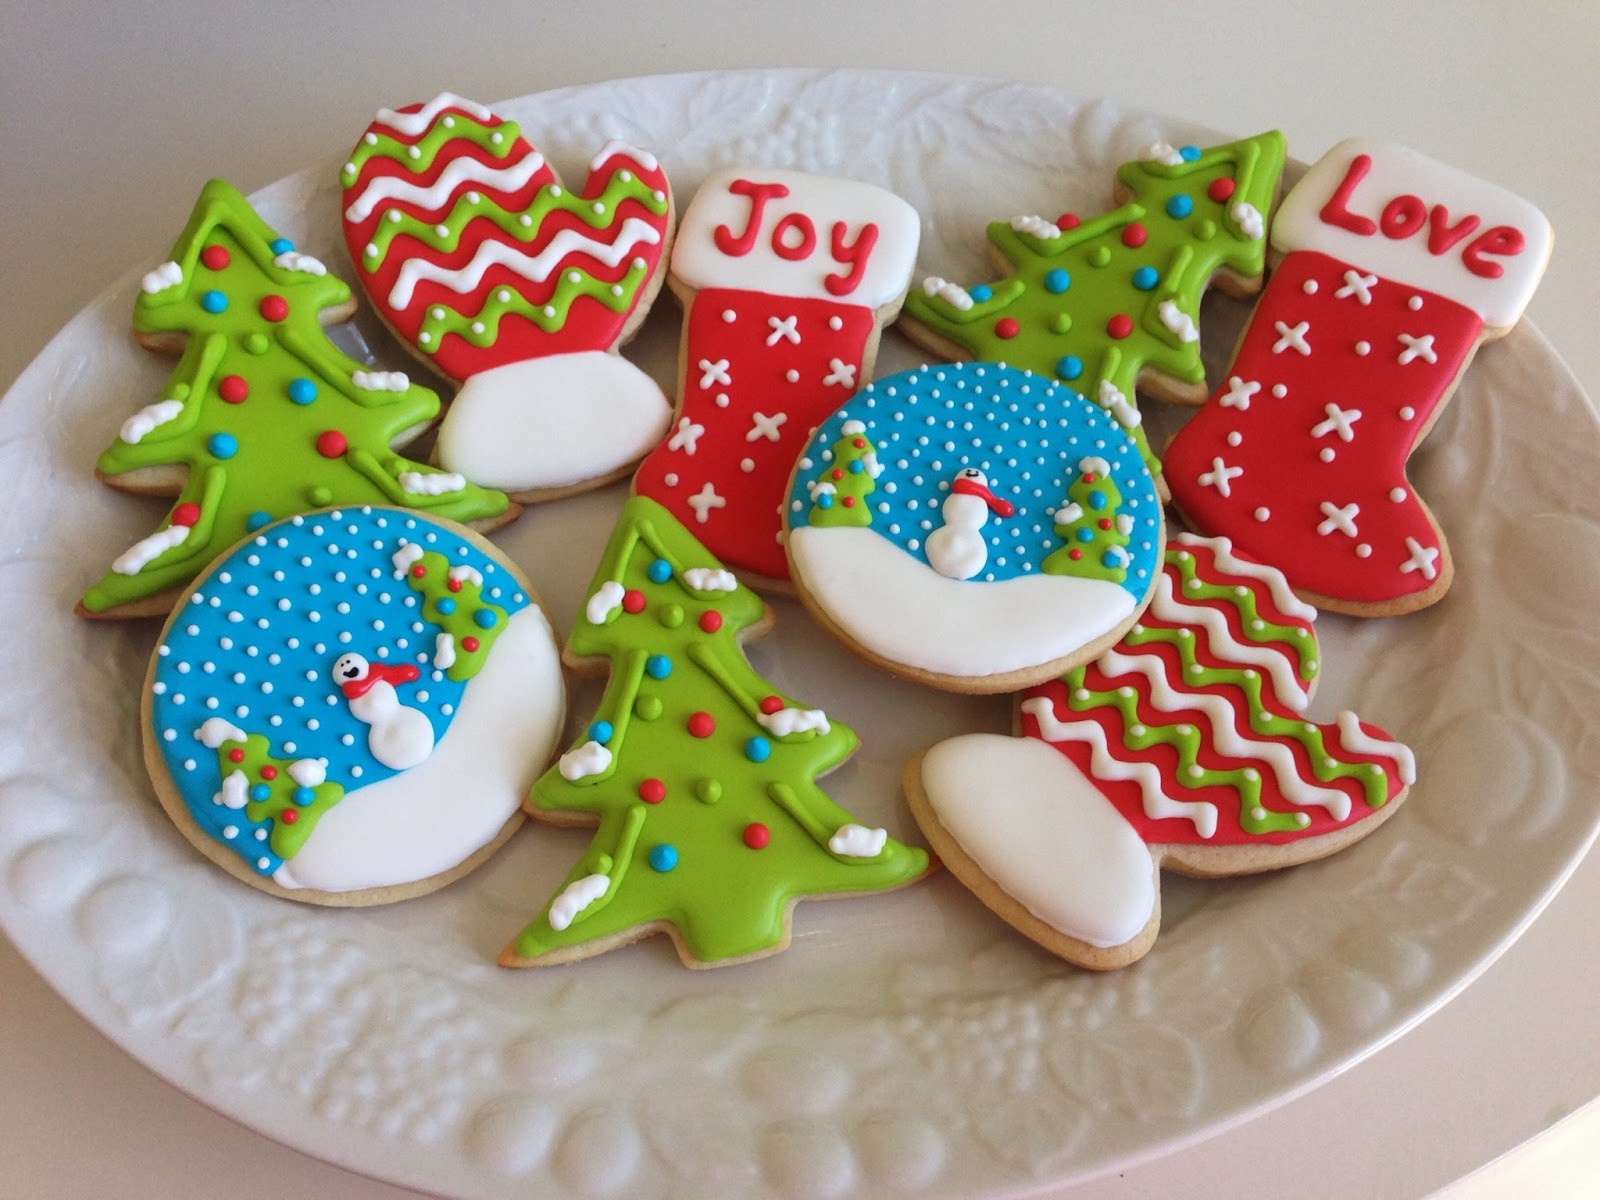 Cut Out Christmas Cookies
 monograms & cake Christmas Cut Out Sugar Cookies with